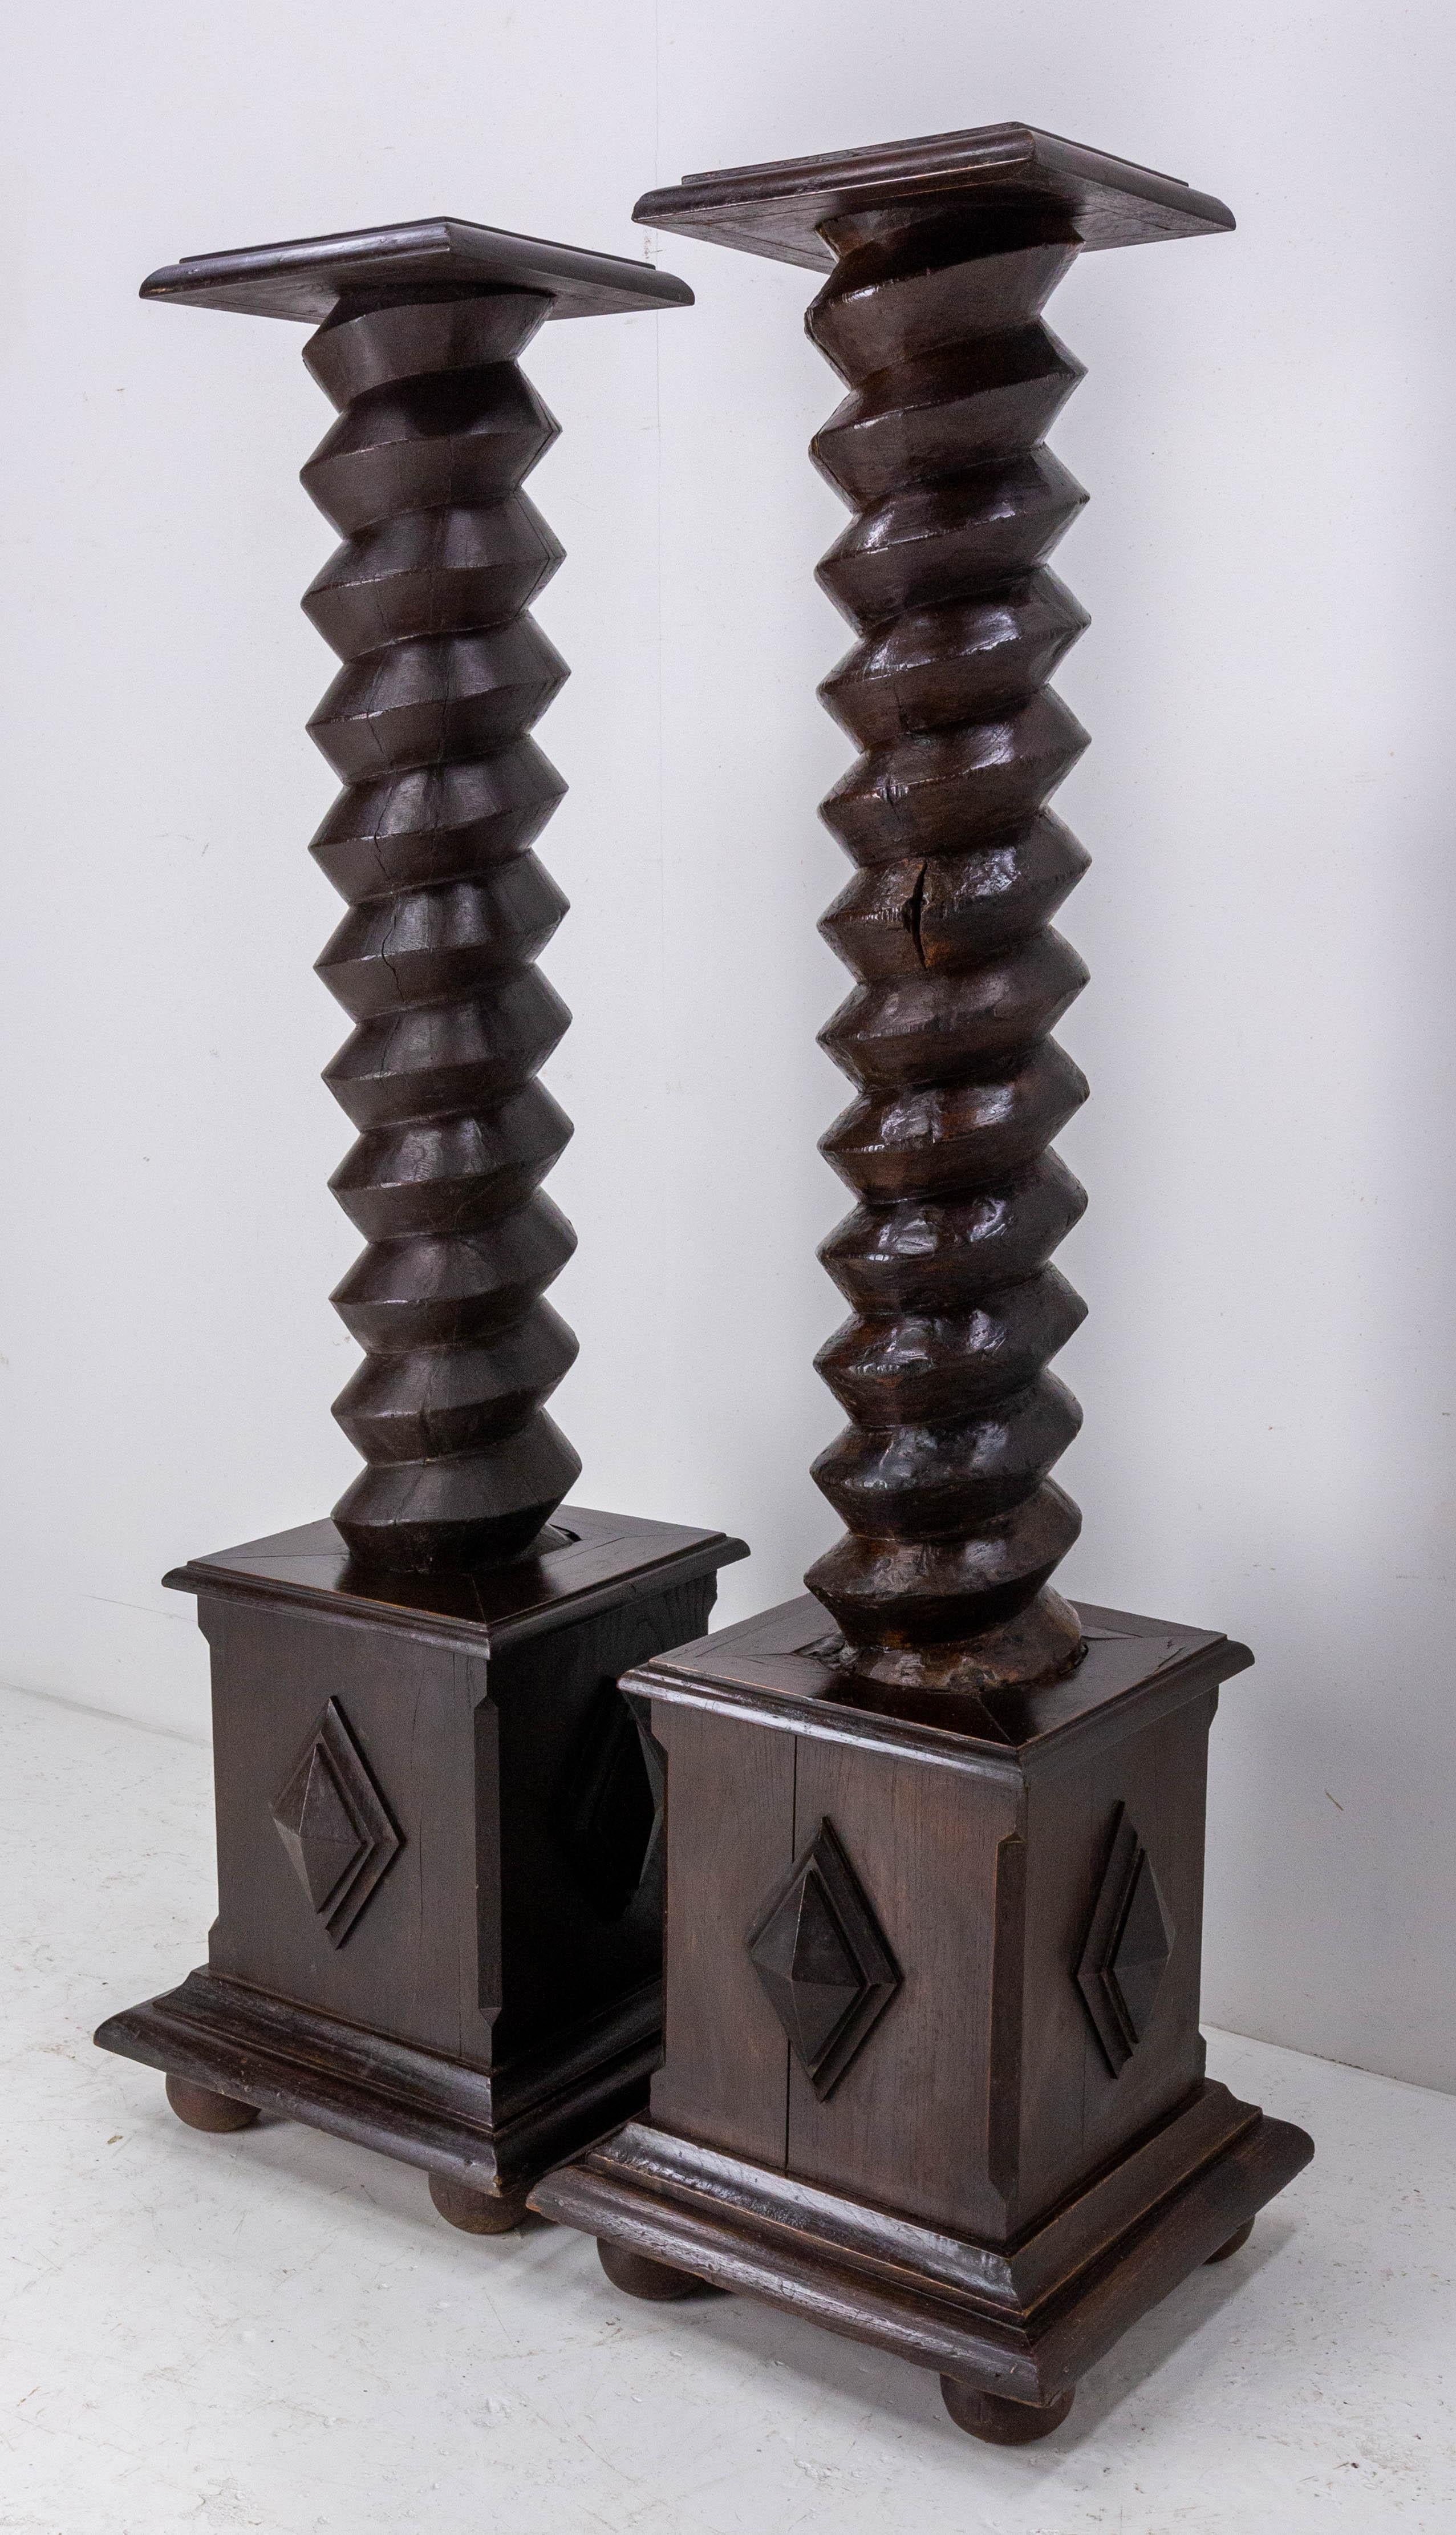 Pair of french pedestals wine press screws
Brutalist style
Very stylish
Dimensions of the top 9.84/9.84 in. (25/25 cm)
Good antique condition: solid and sound
Please see also: 
LU4476222724272 French wine press screw pedestal plant holder,